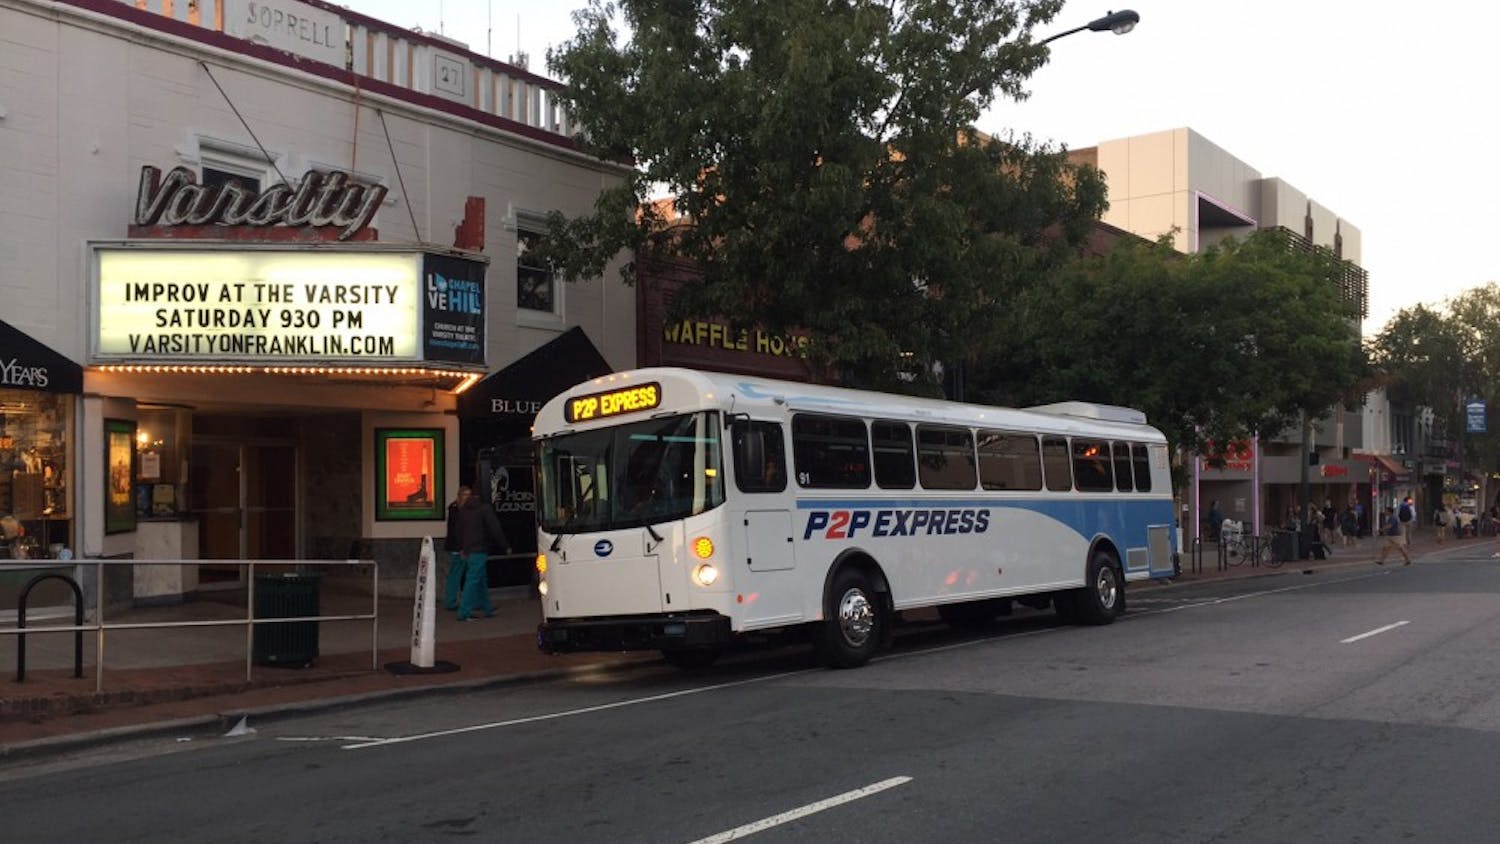 &nbsp;A P2P shuttle bus waits for passengers to board at Varsity Theatre bus stop on Franklin St.&nbsp;